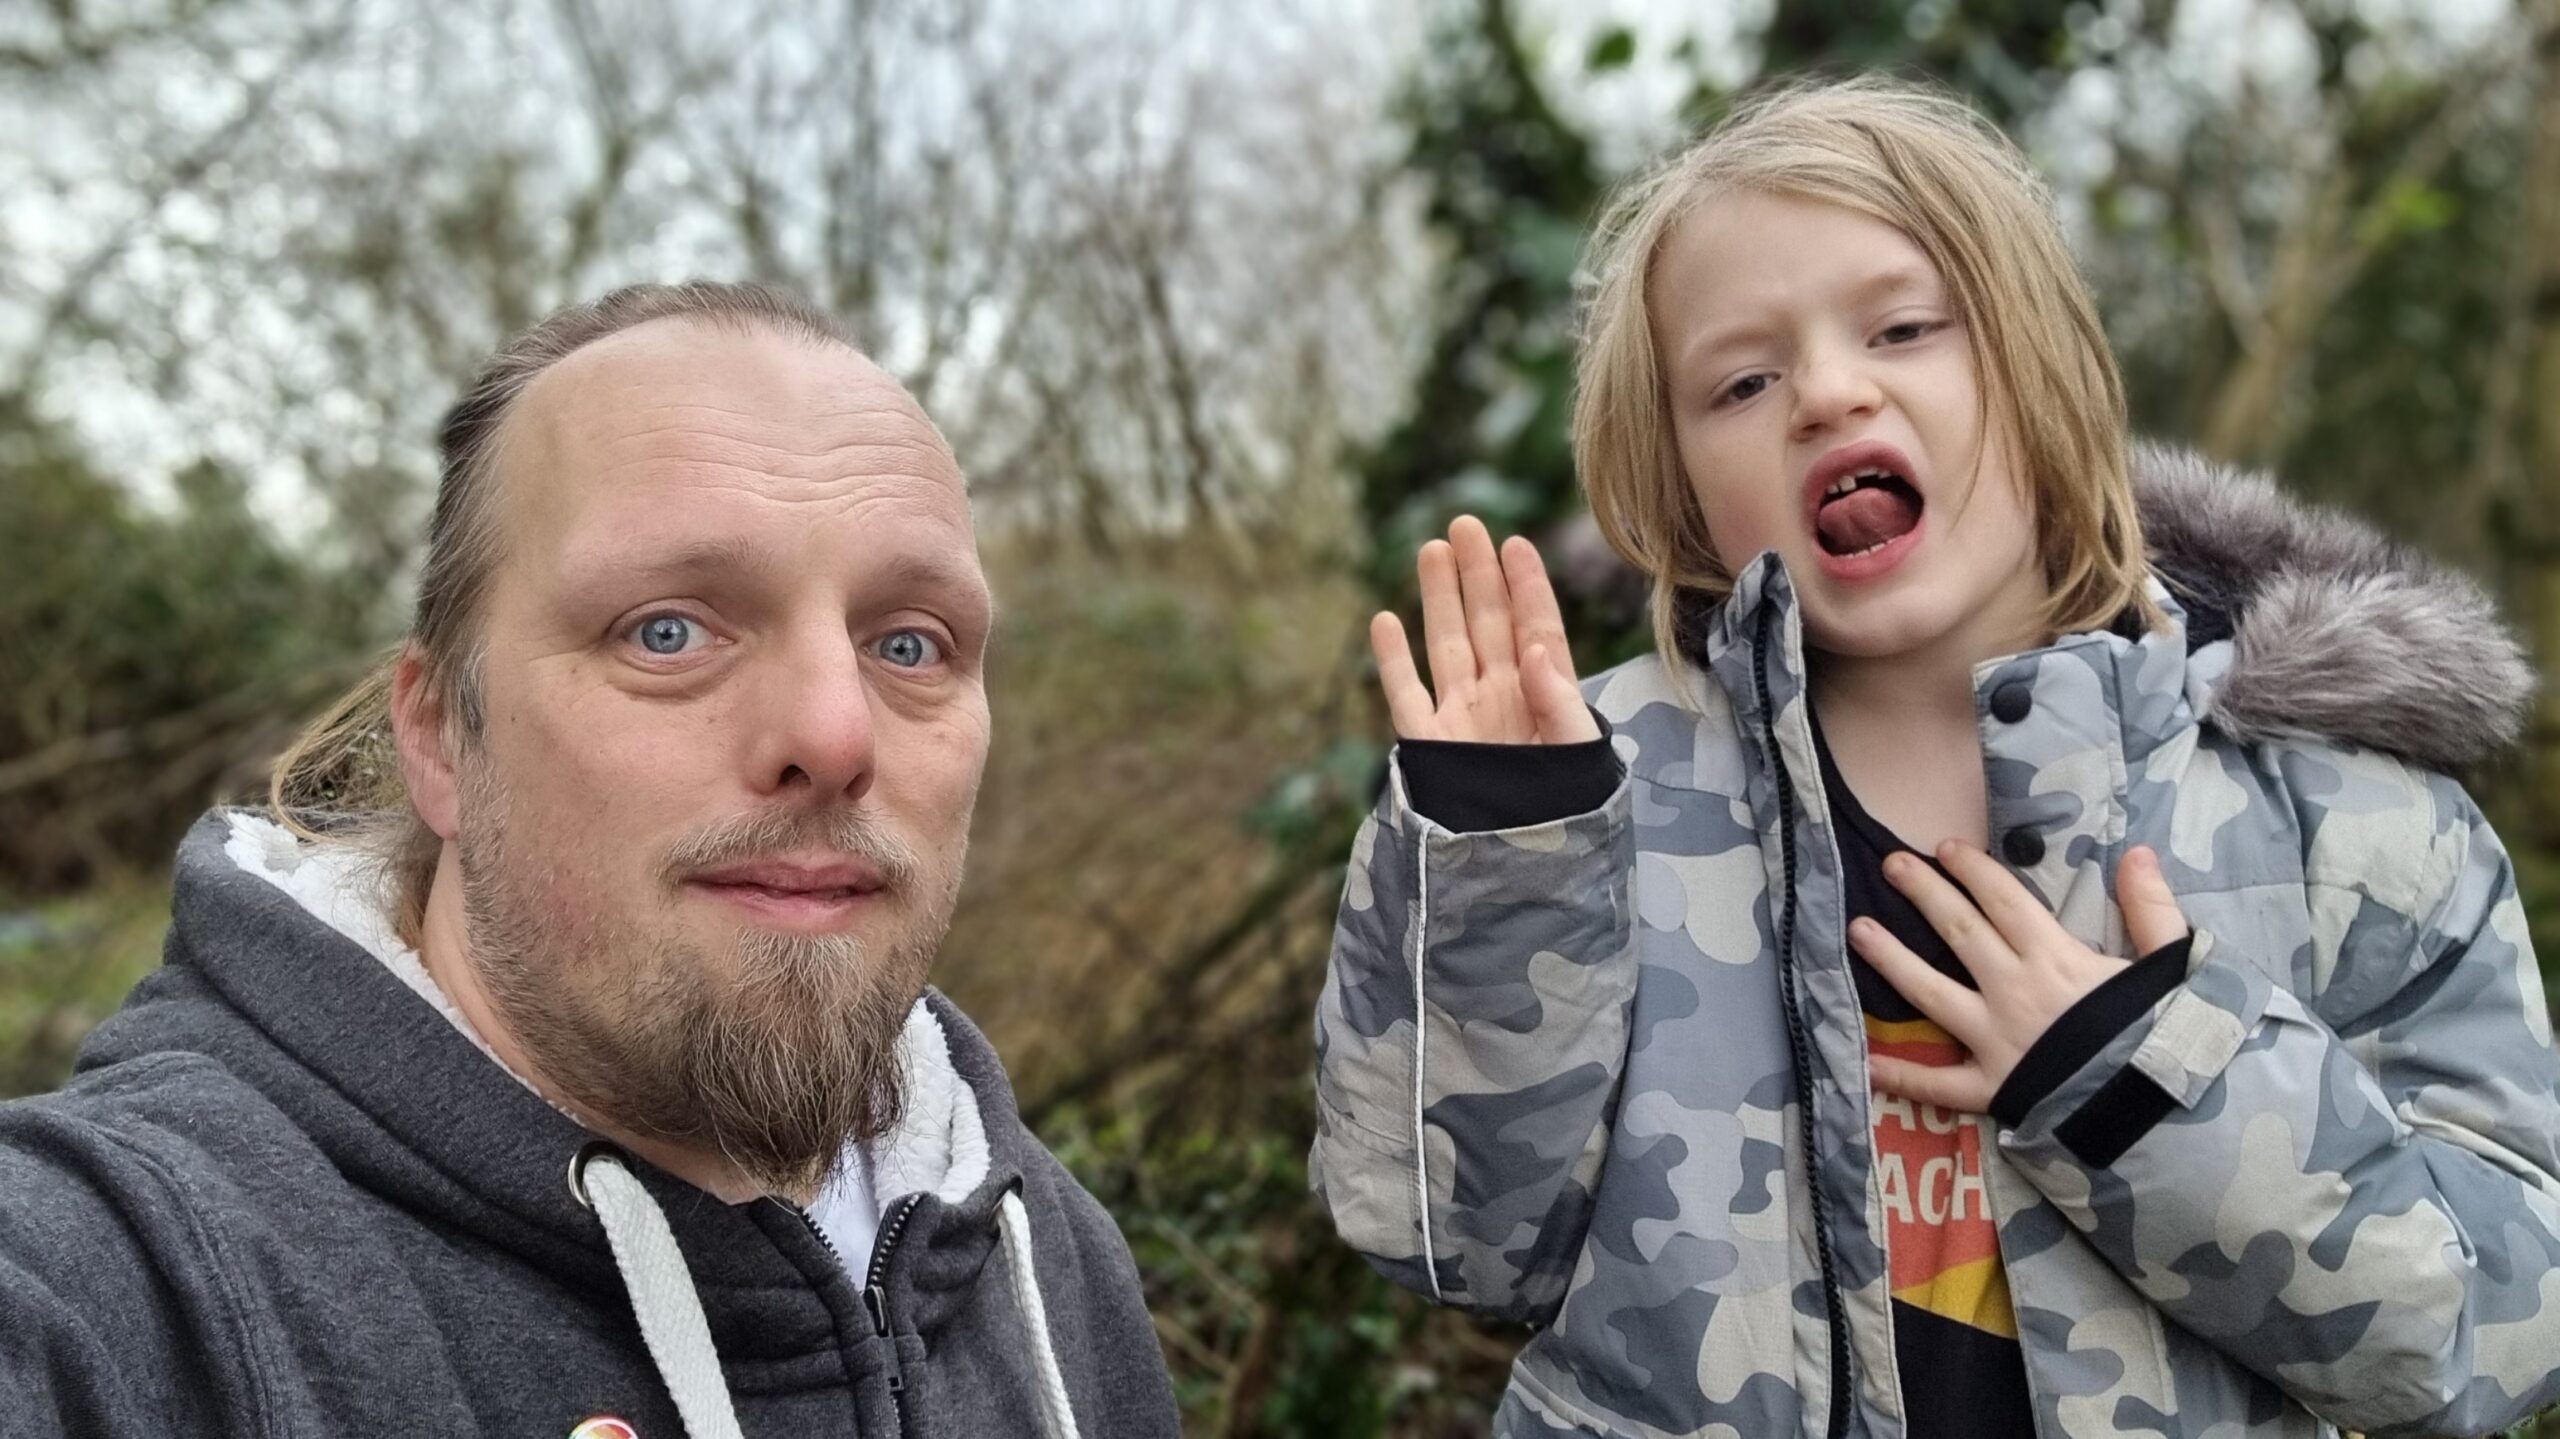 Dan, in a grey jumper, stand beside a 7-year-old boy wearing a camo jacket, in a lightly wooded area.